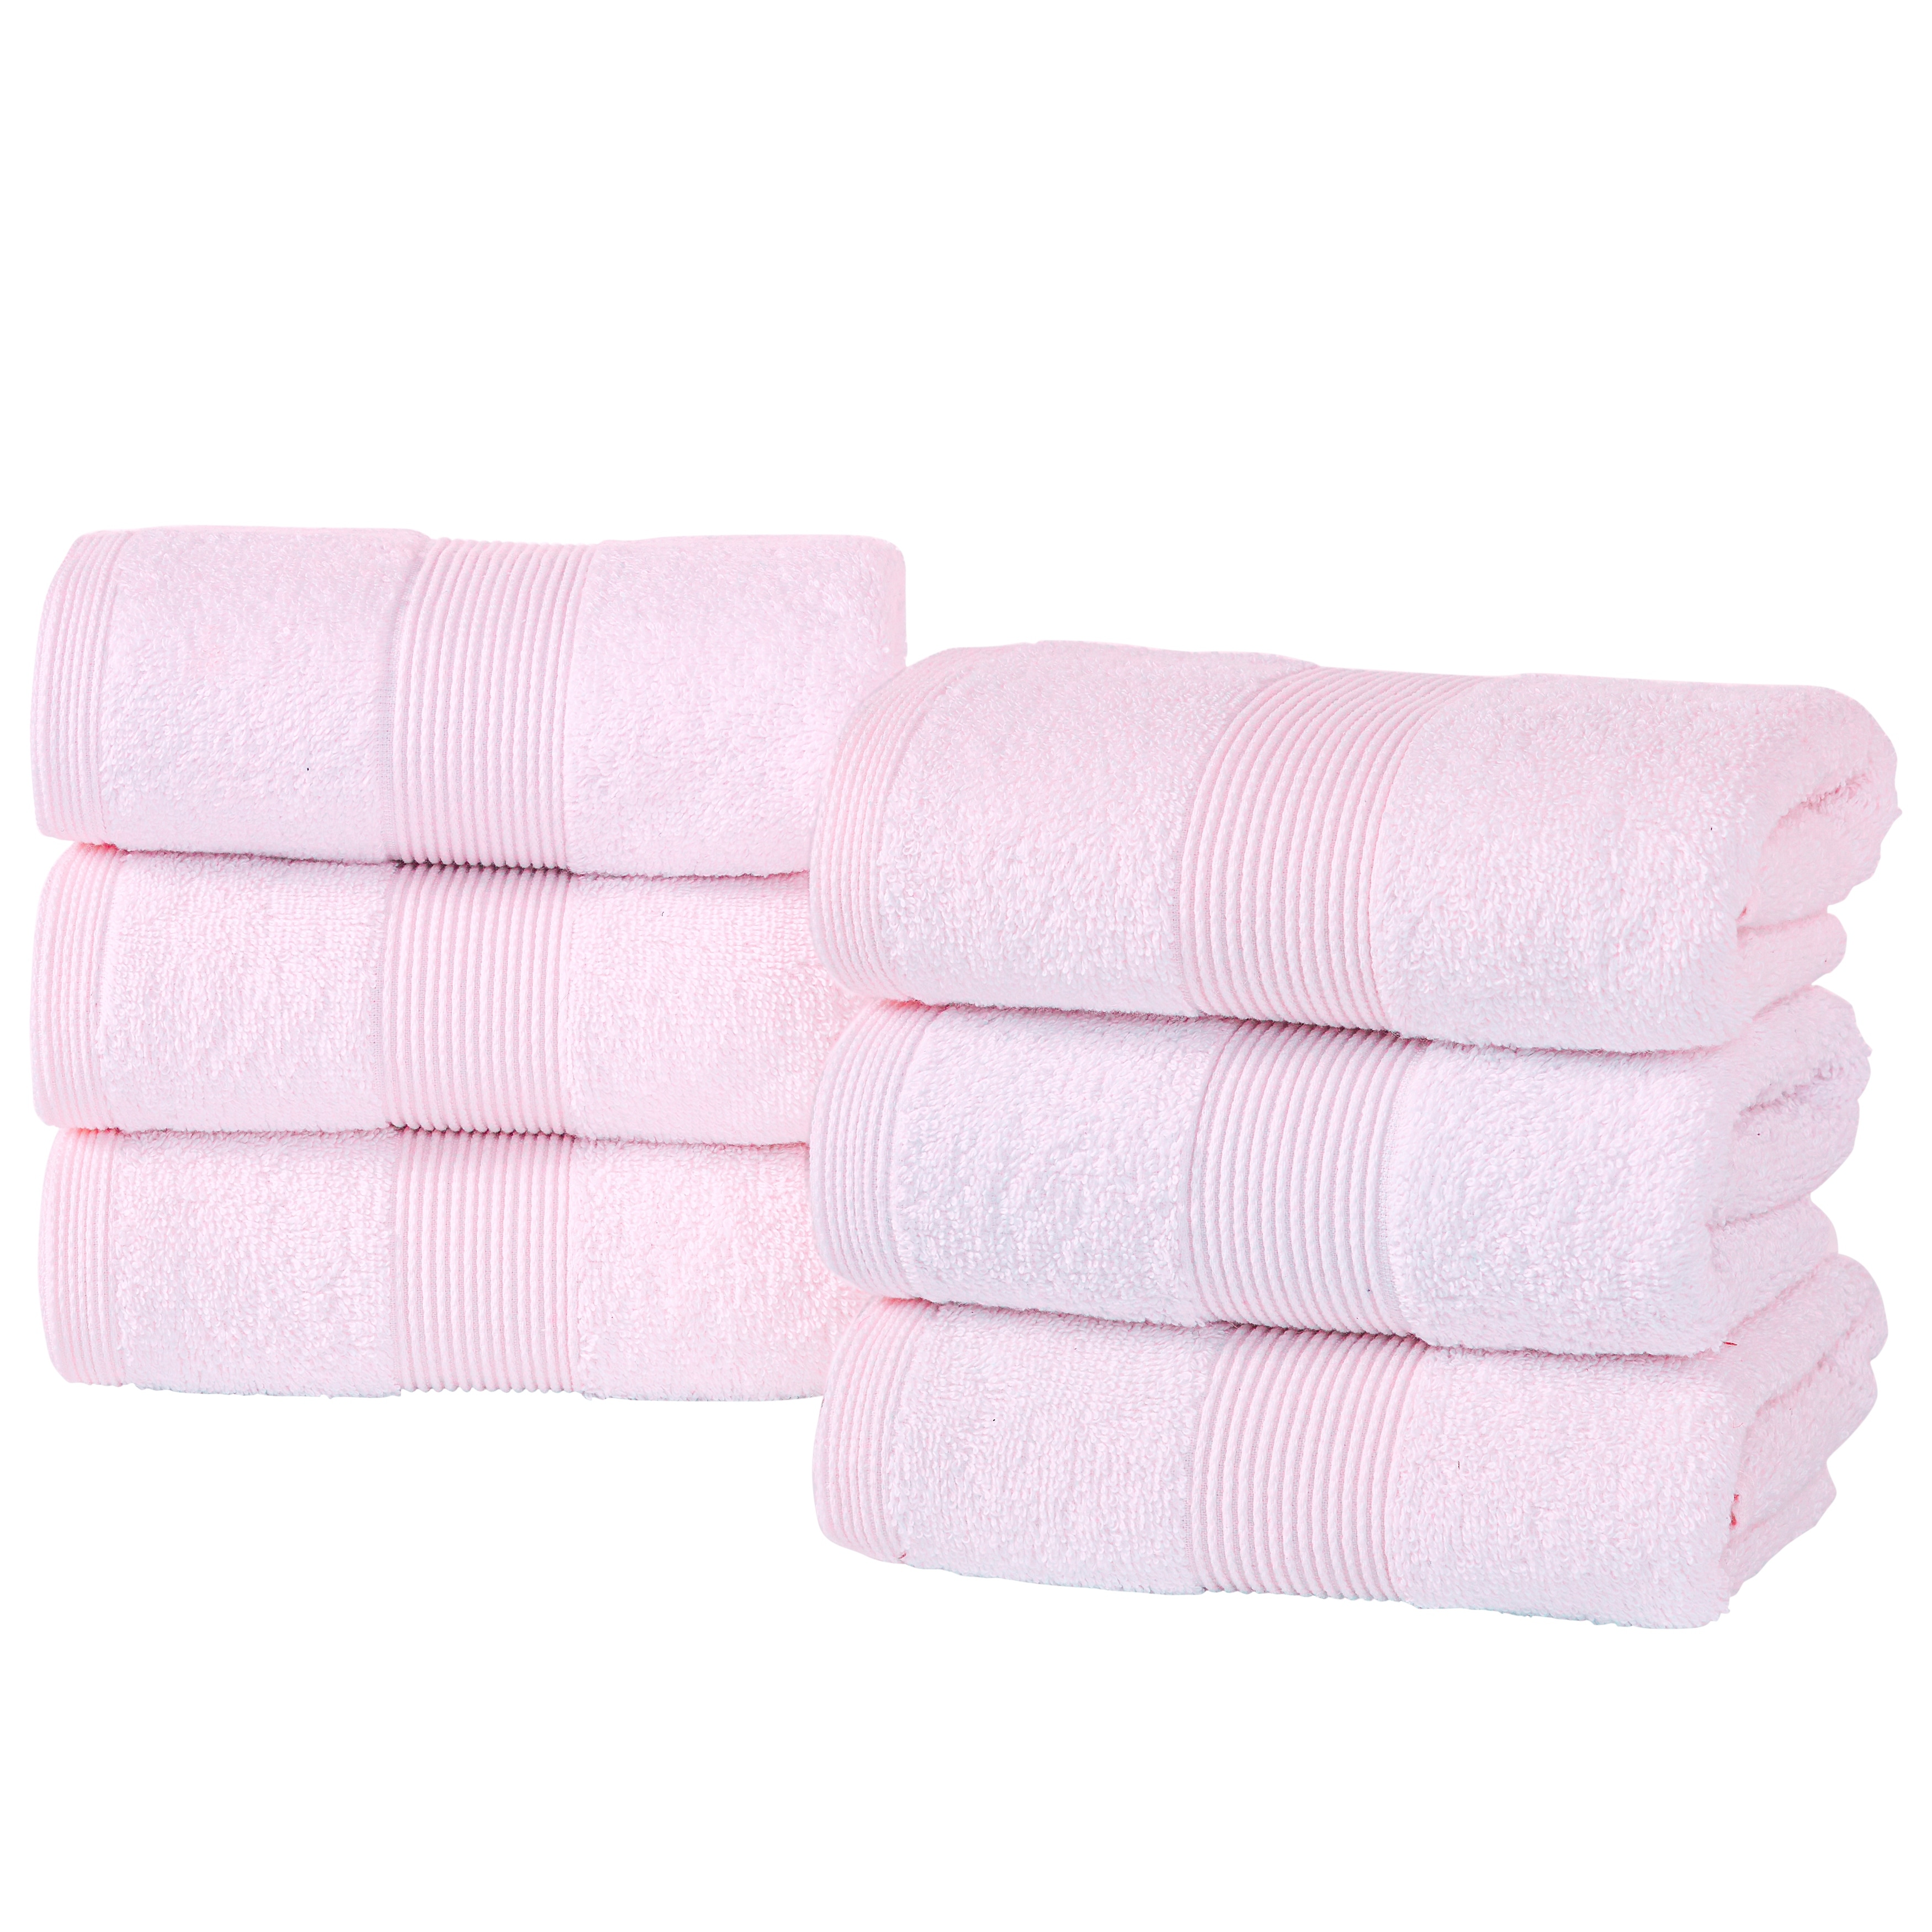 https://ak1.ostkcdn.com/images/products/is/images/direct/8a1f0c8445e9ccef3c84db77ac8312377fae2cfa/Fabstyles-Luxury-Hand-Towels-16-x-28-Inches-Set-of-6.jpg